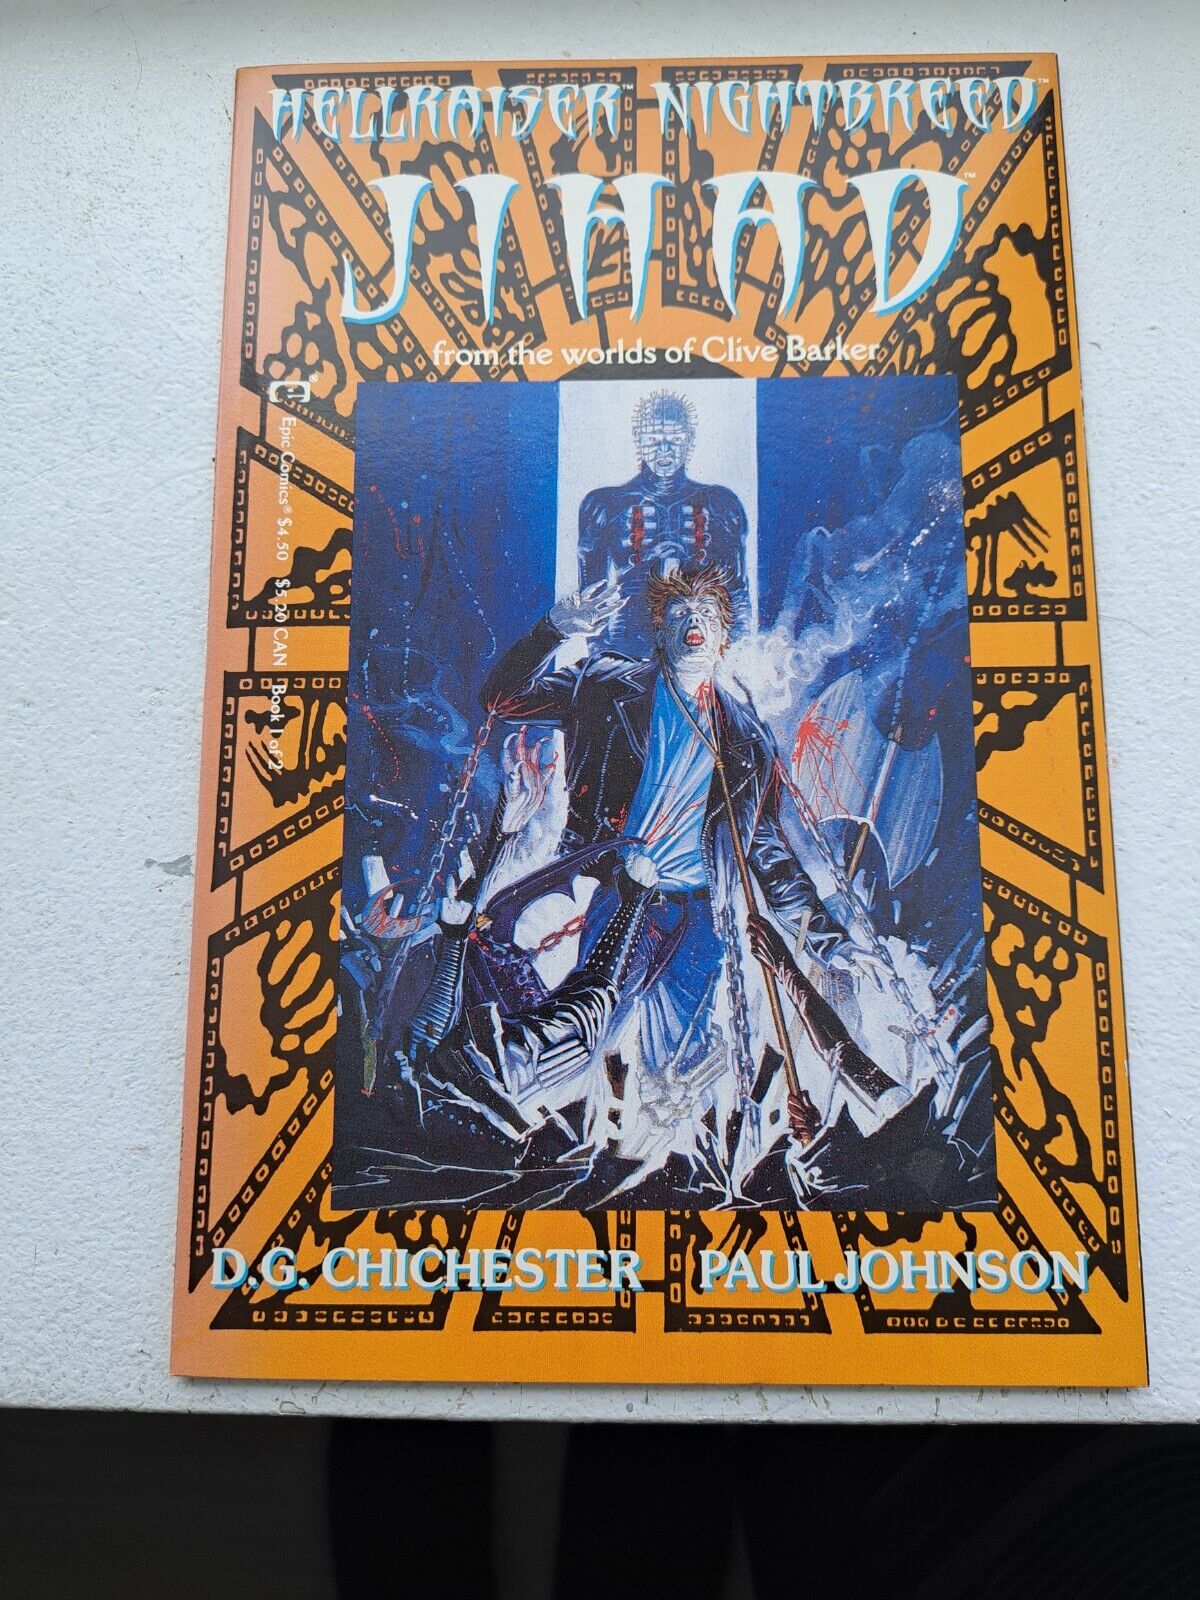 Clive Barker's Hellraiser Nightbreed: Jihad #1 (1991 ) Signed By Clive Barker